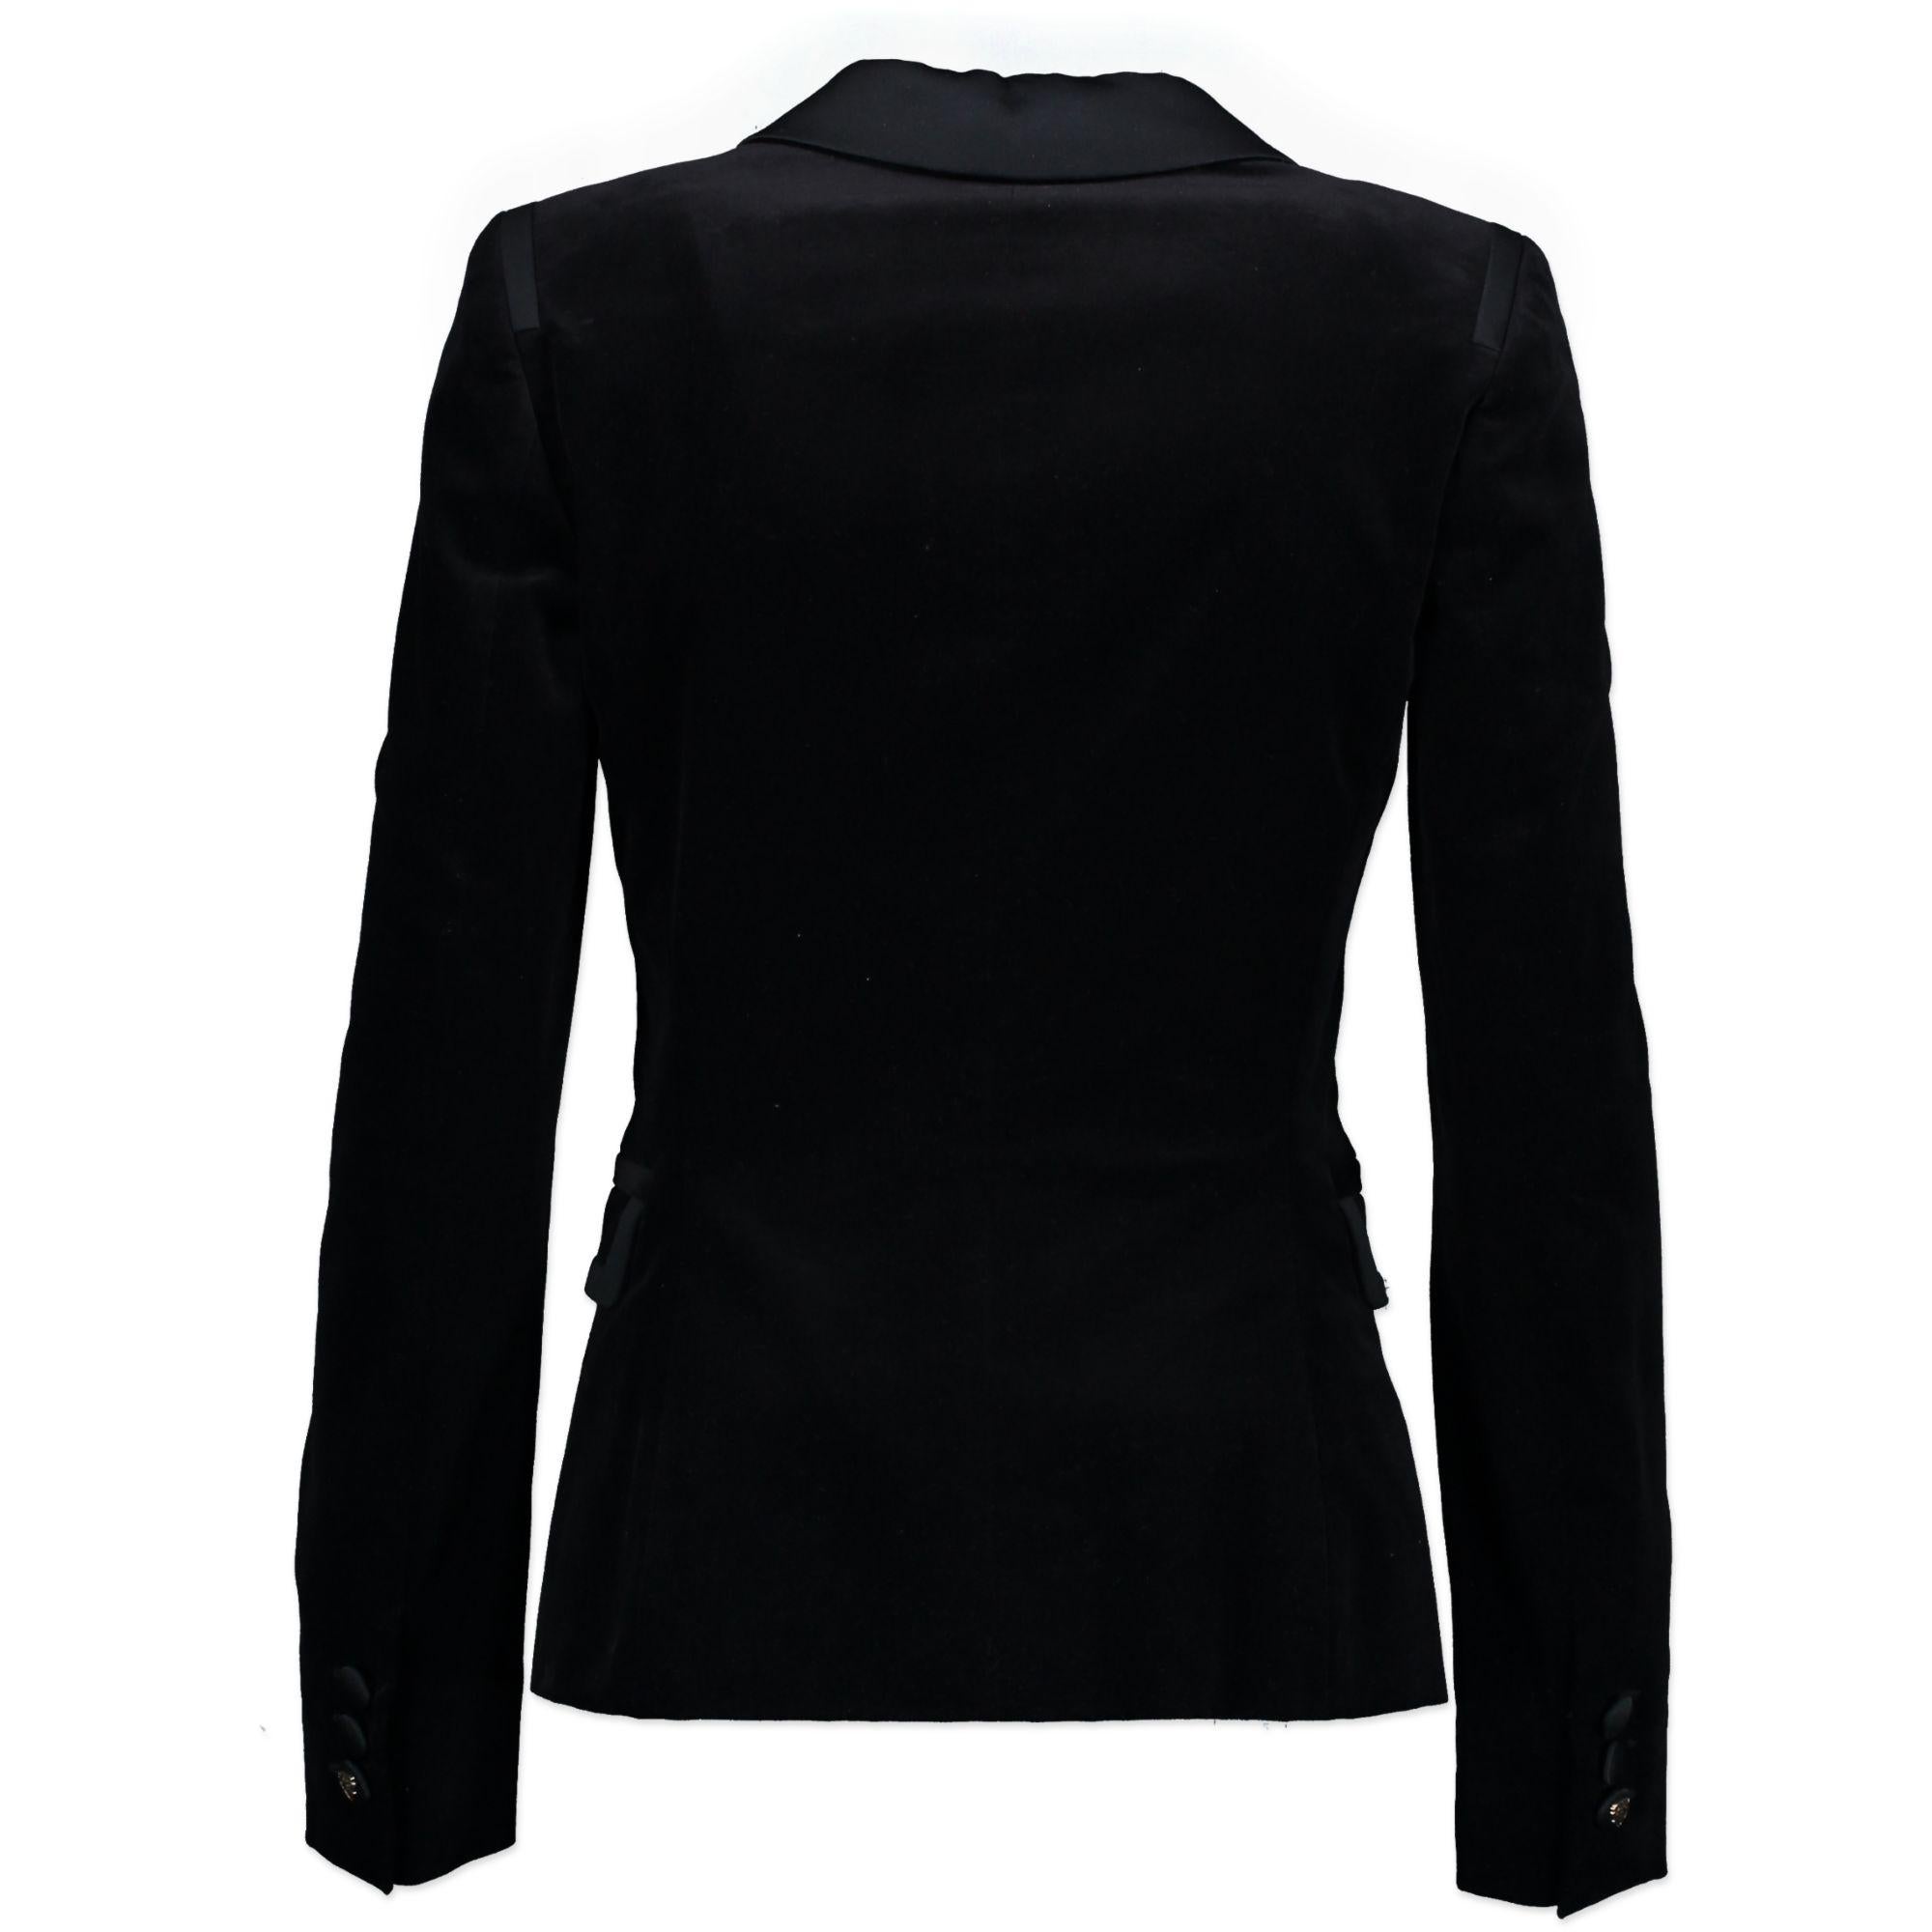 In excellent condition

Gucci black velvet suit (Blazer +  Pants) - Size 38

The power suit is still a trend, style this suit with some patent court heels and you will be ready to go for your goals. The velvet material makes this suit look 